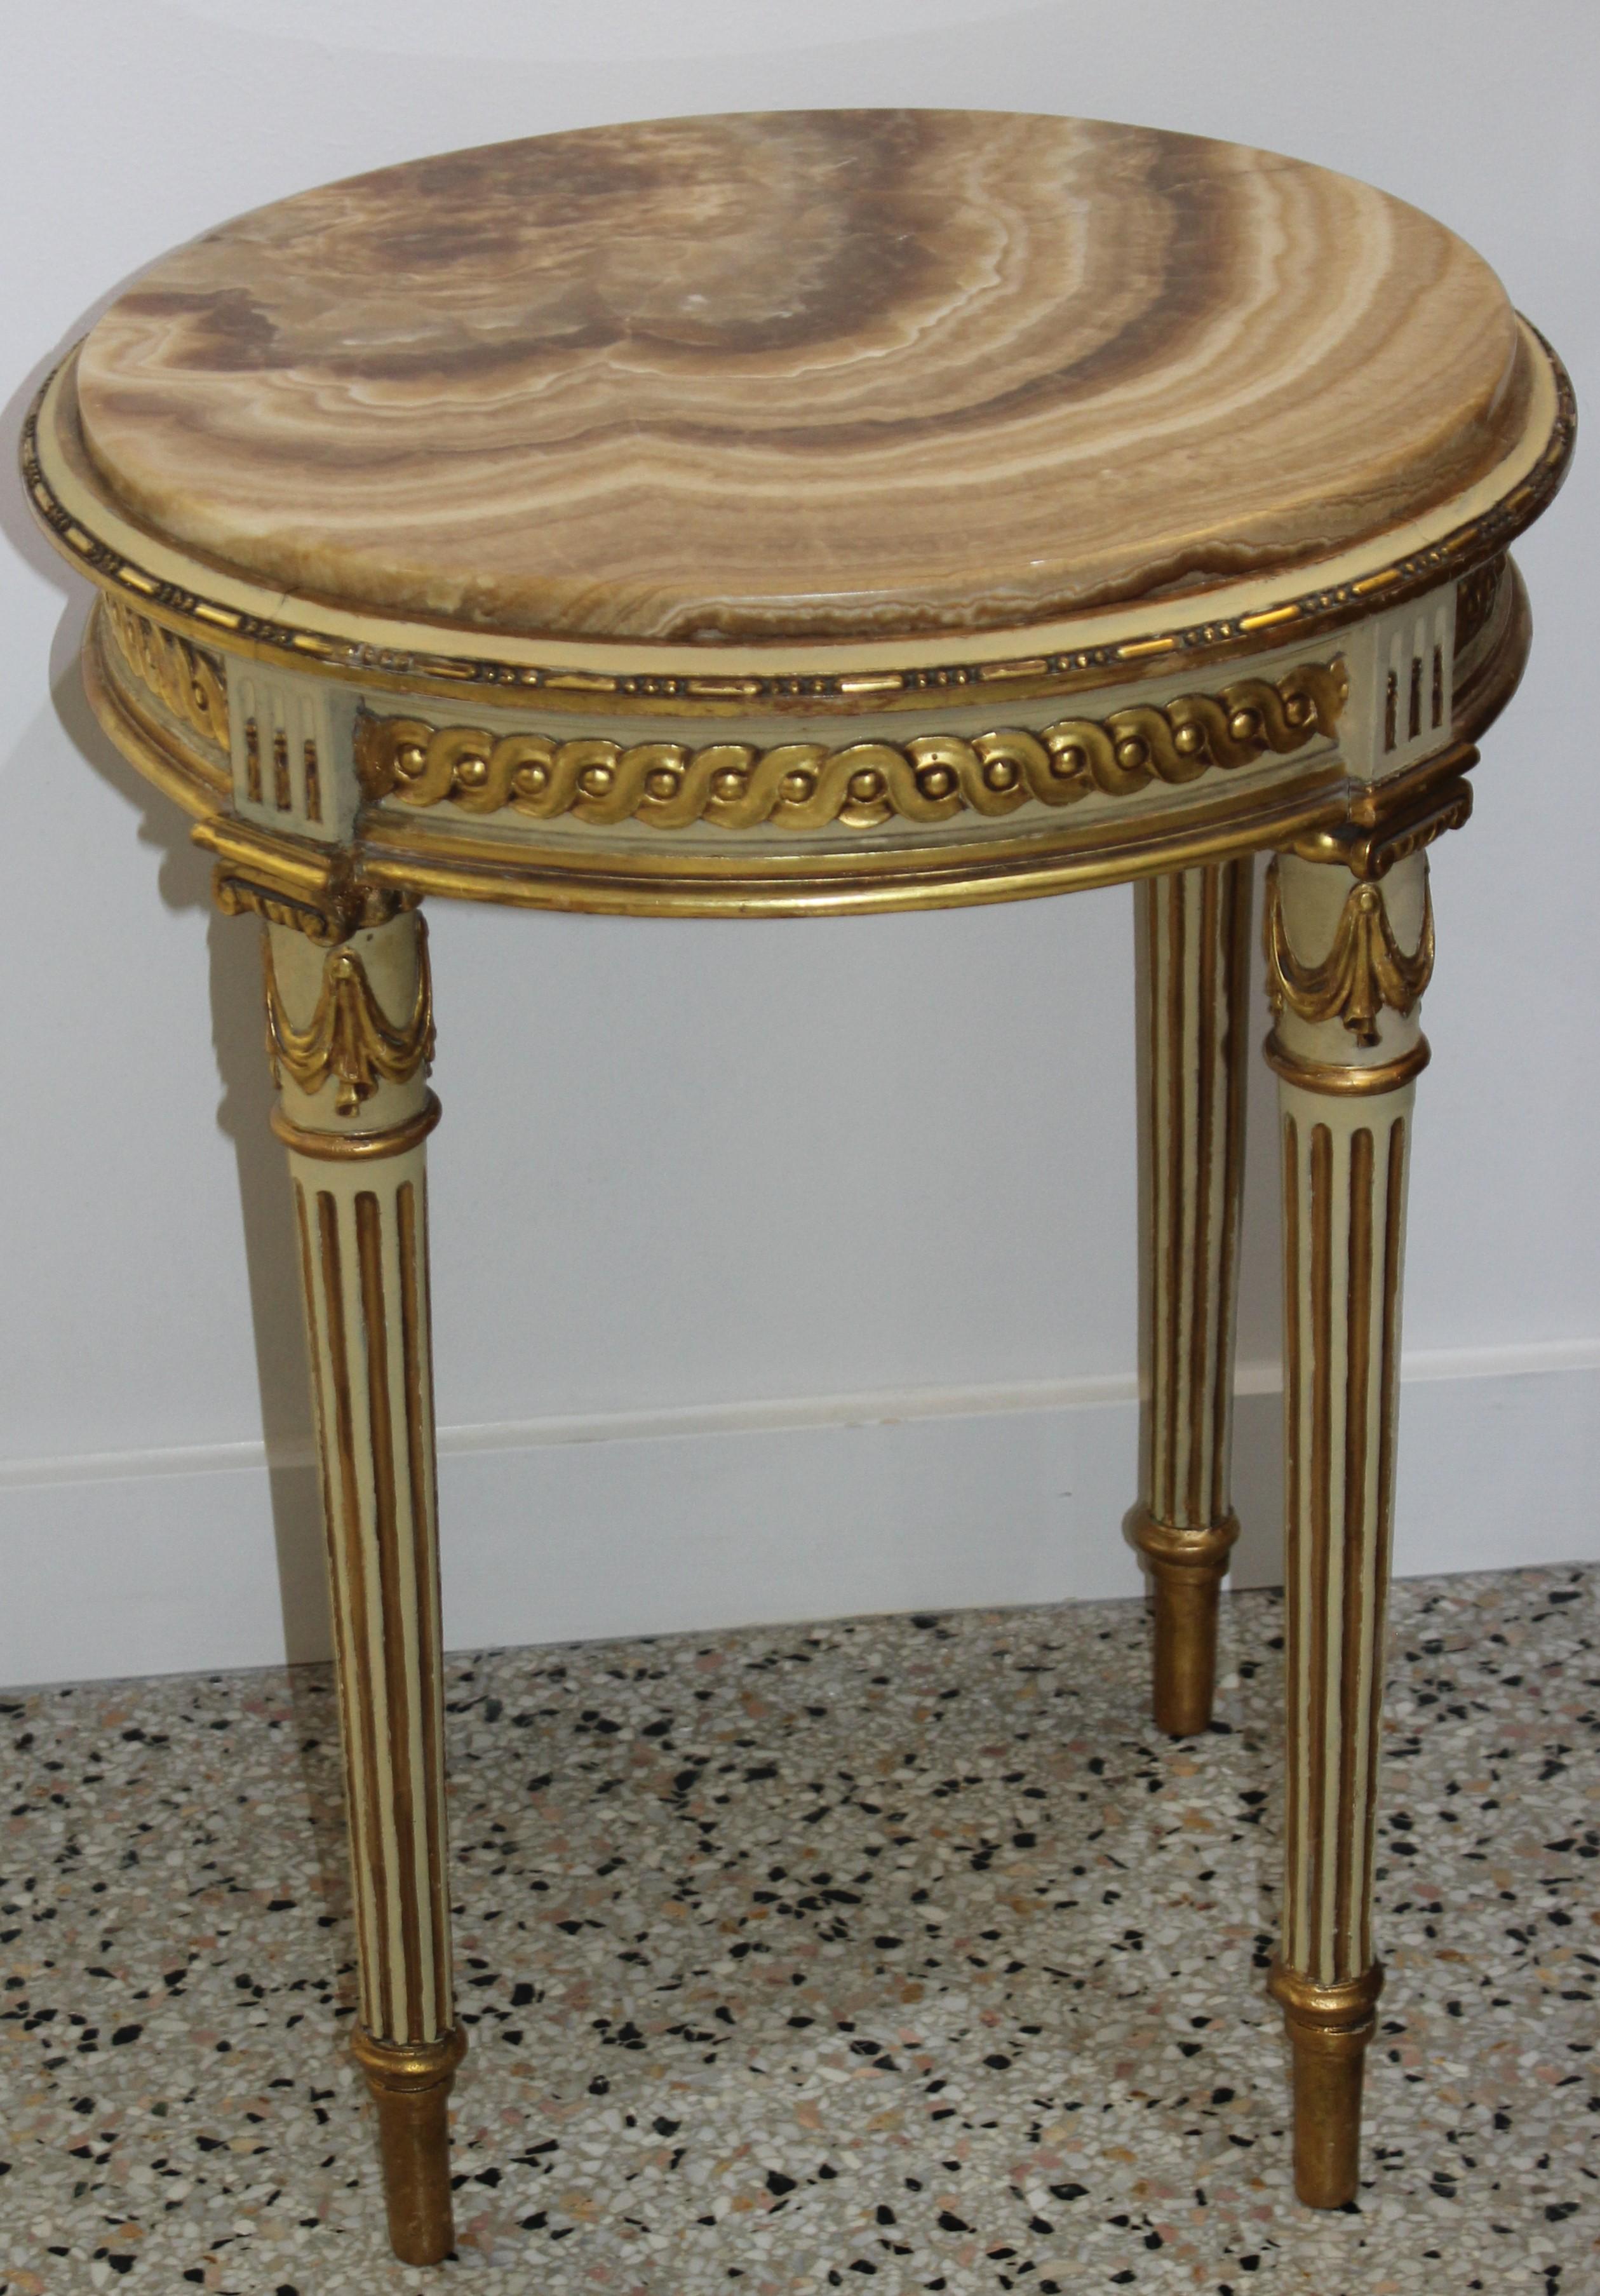 This stylish, romantic and chic petit side table was acquired from a Palm Beach estate. The table dates to the 1890s-1920s and is painted in a soft putty green and accented with gild gold. The butterscotch colored onyx inset comliments the gilt gold